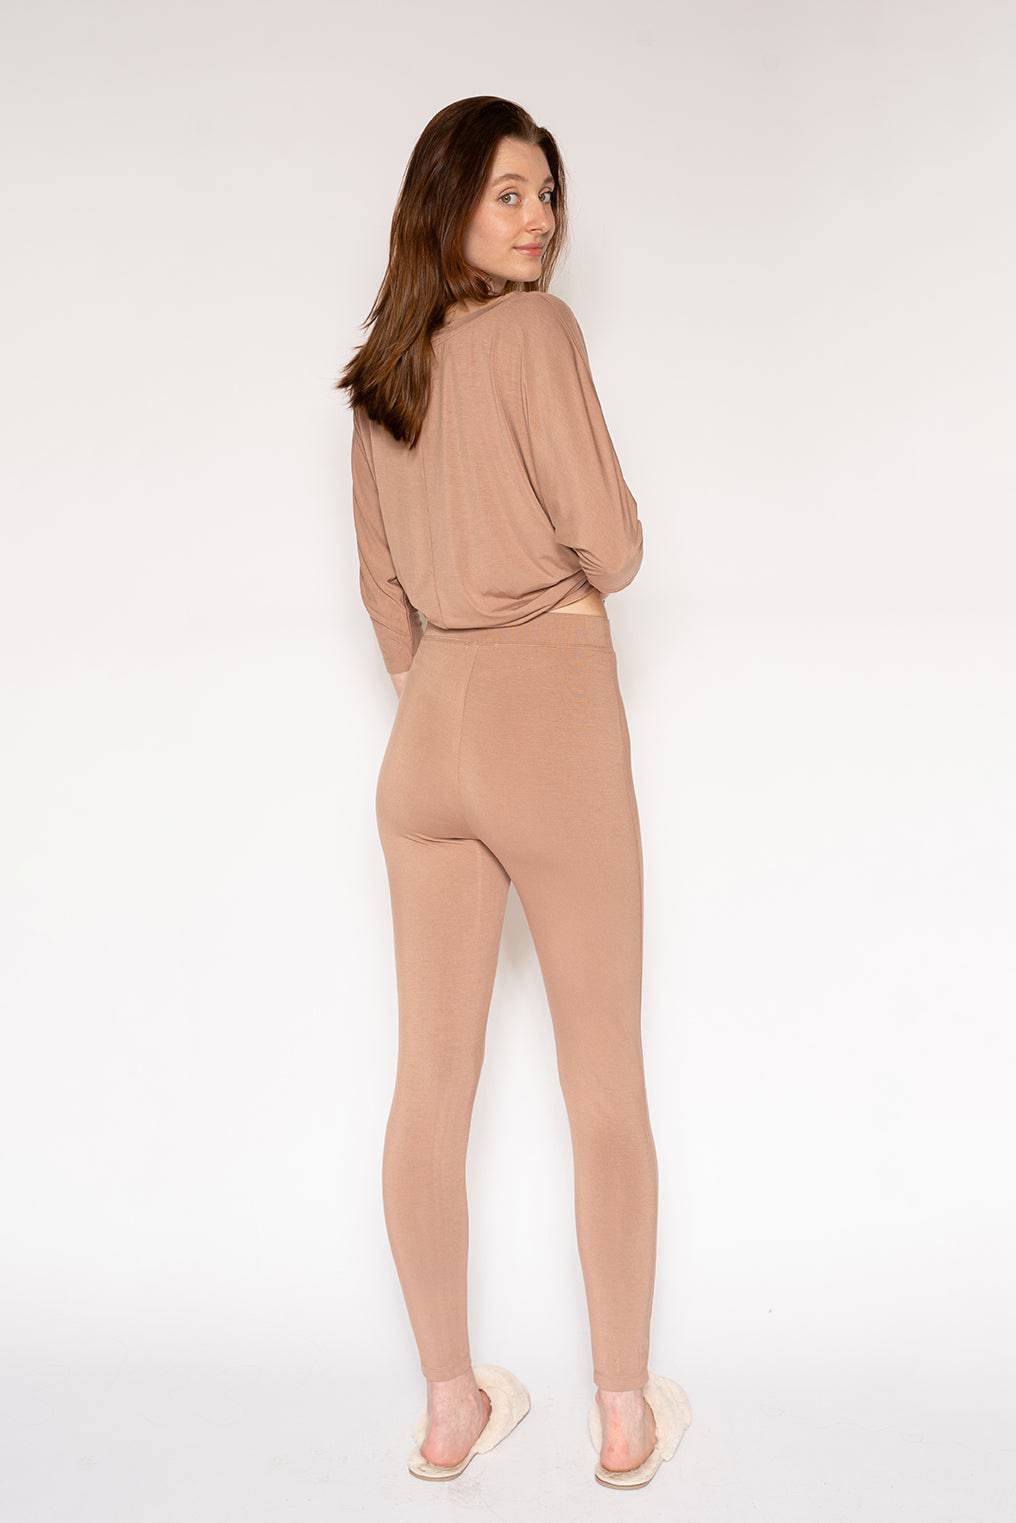 Essential Lounge Pant - Ginger Snap - LATTELOVE Co.